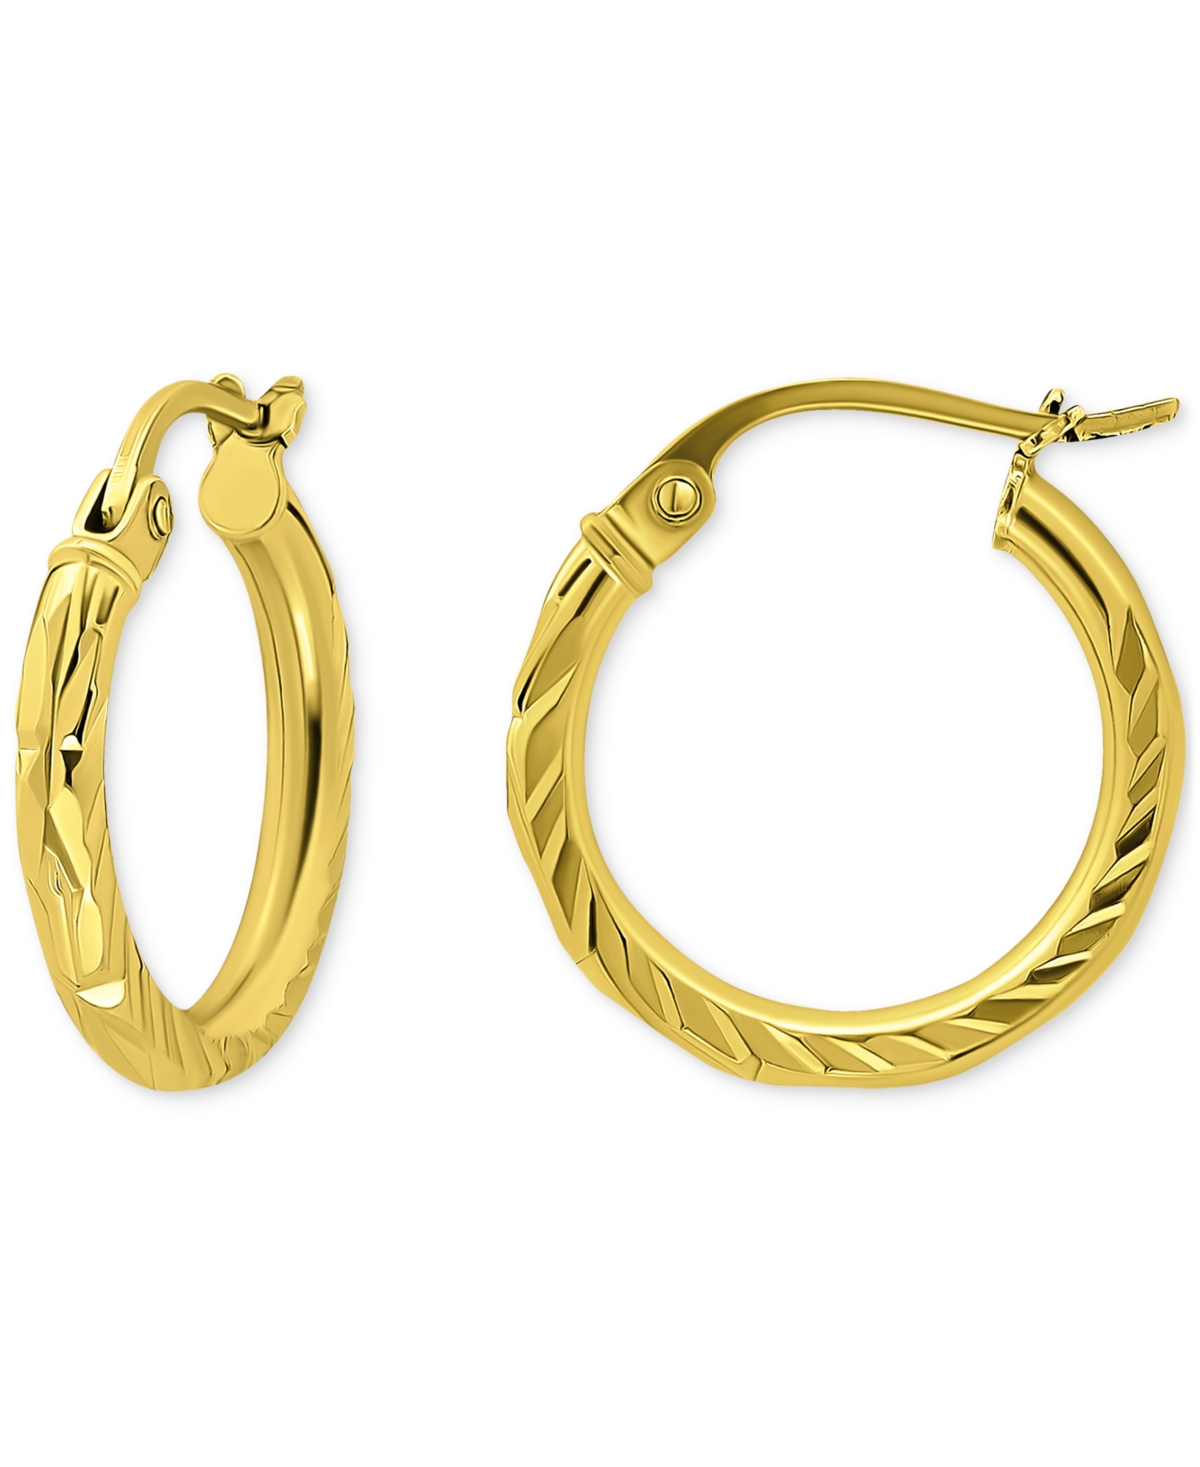 Giani Bernini Textured Small Hoop Earrings In 18k Gold-plated Sterling Silver, 15mm, Created For Macy's In Gold Over Silver